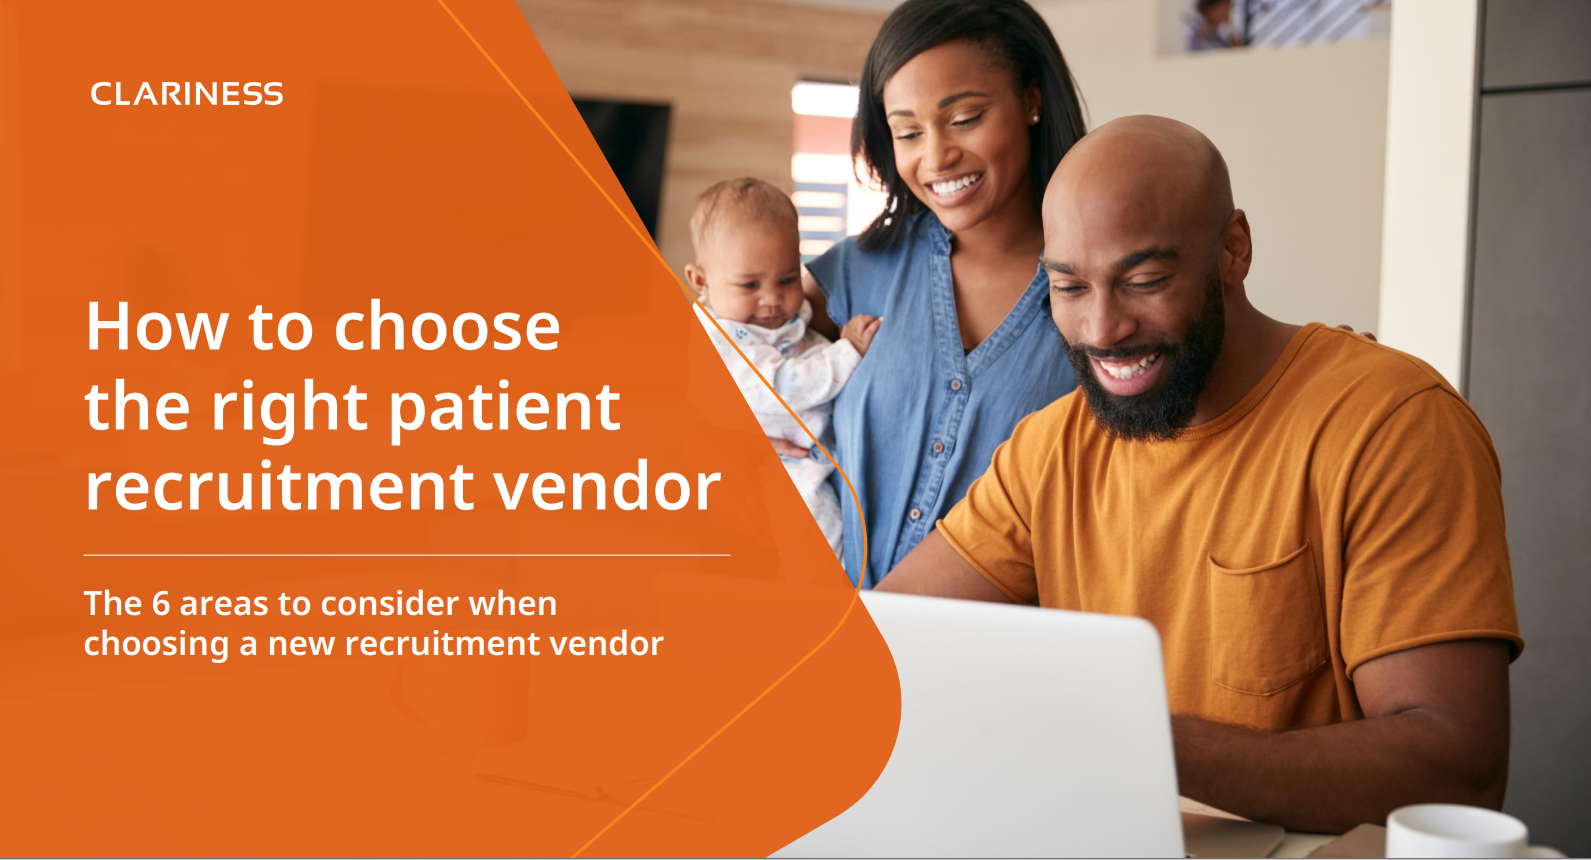 How to choose the right patient recruitment vendor